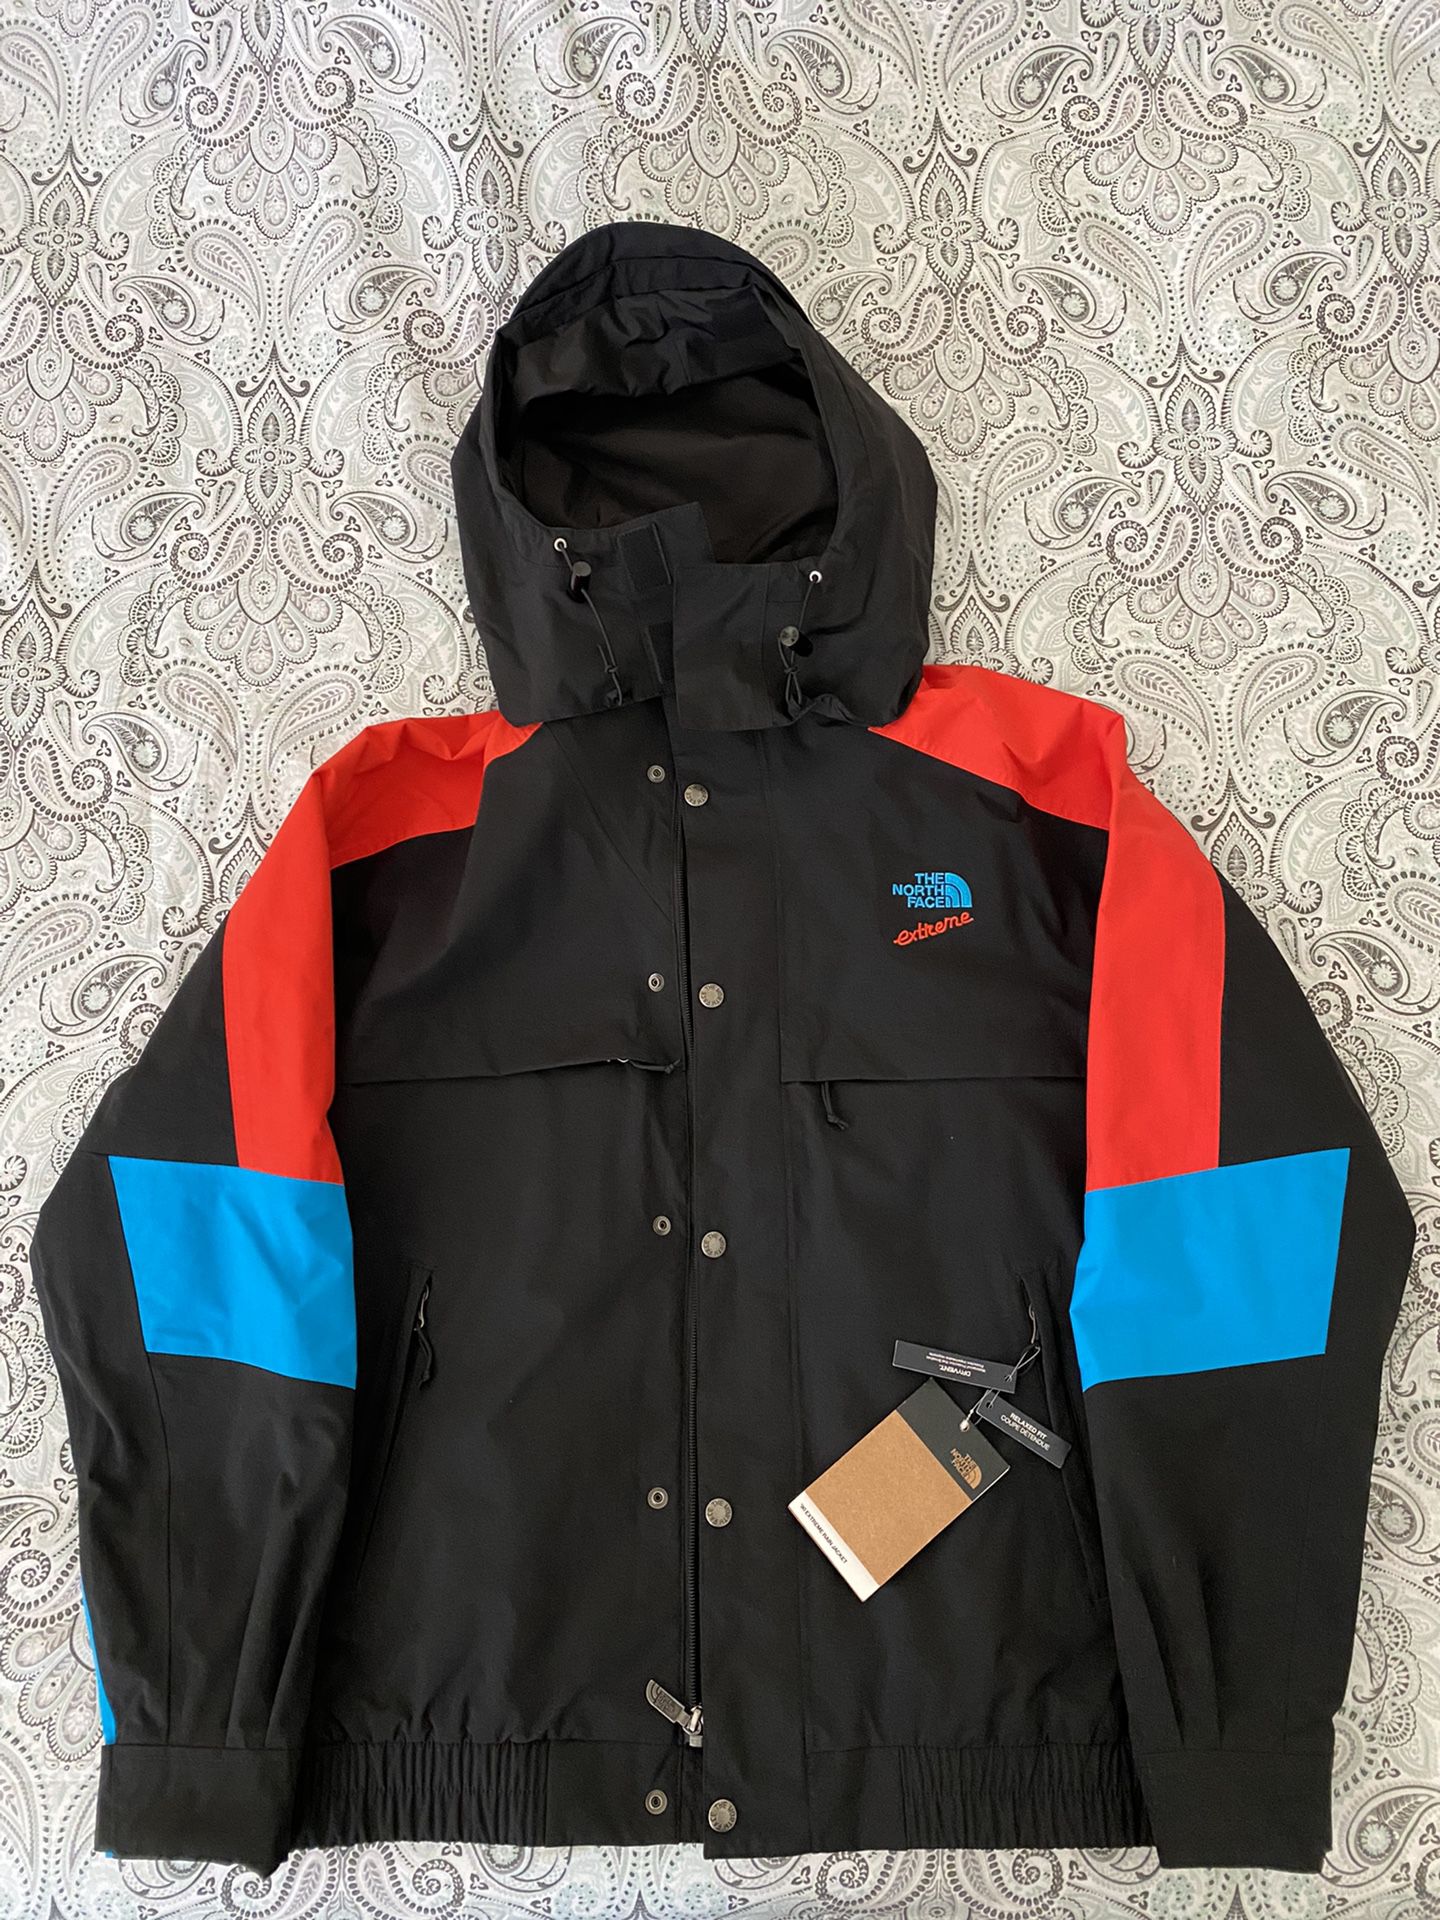 North Face 90’ Extreme Rain Jacket Size Small